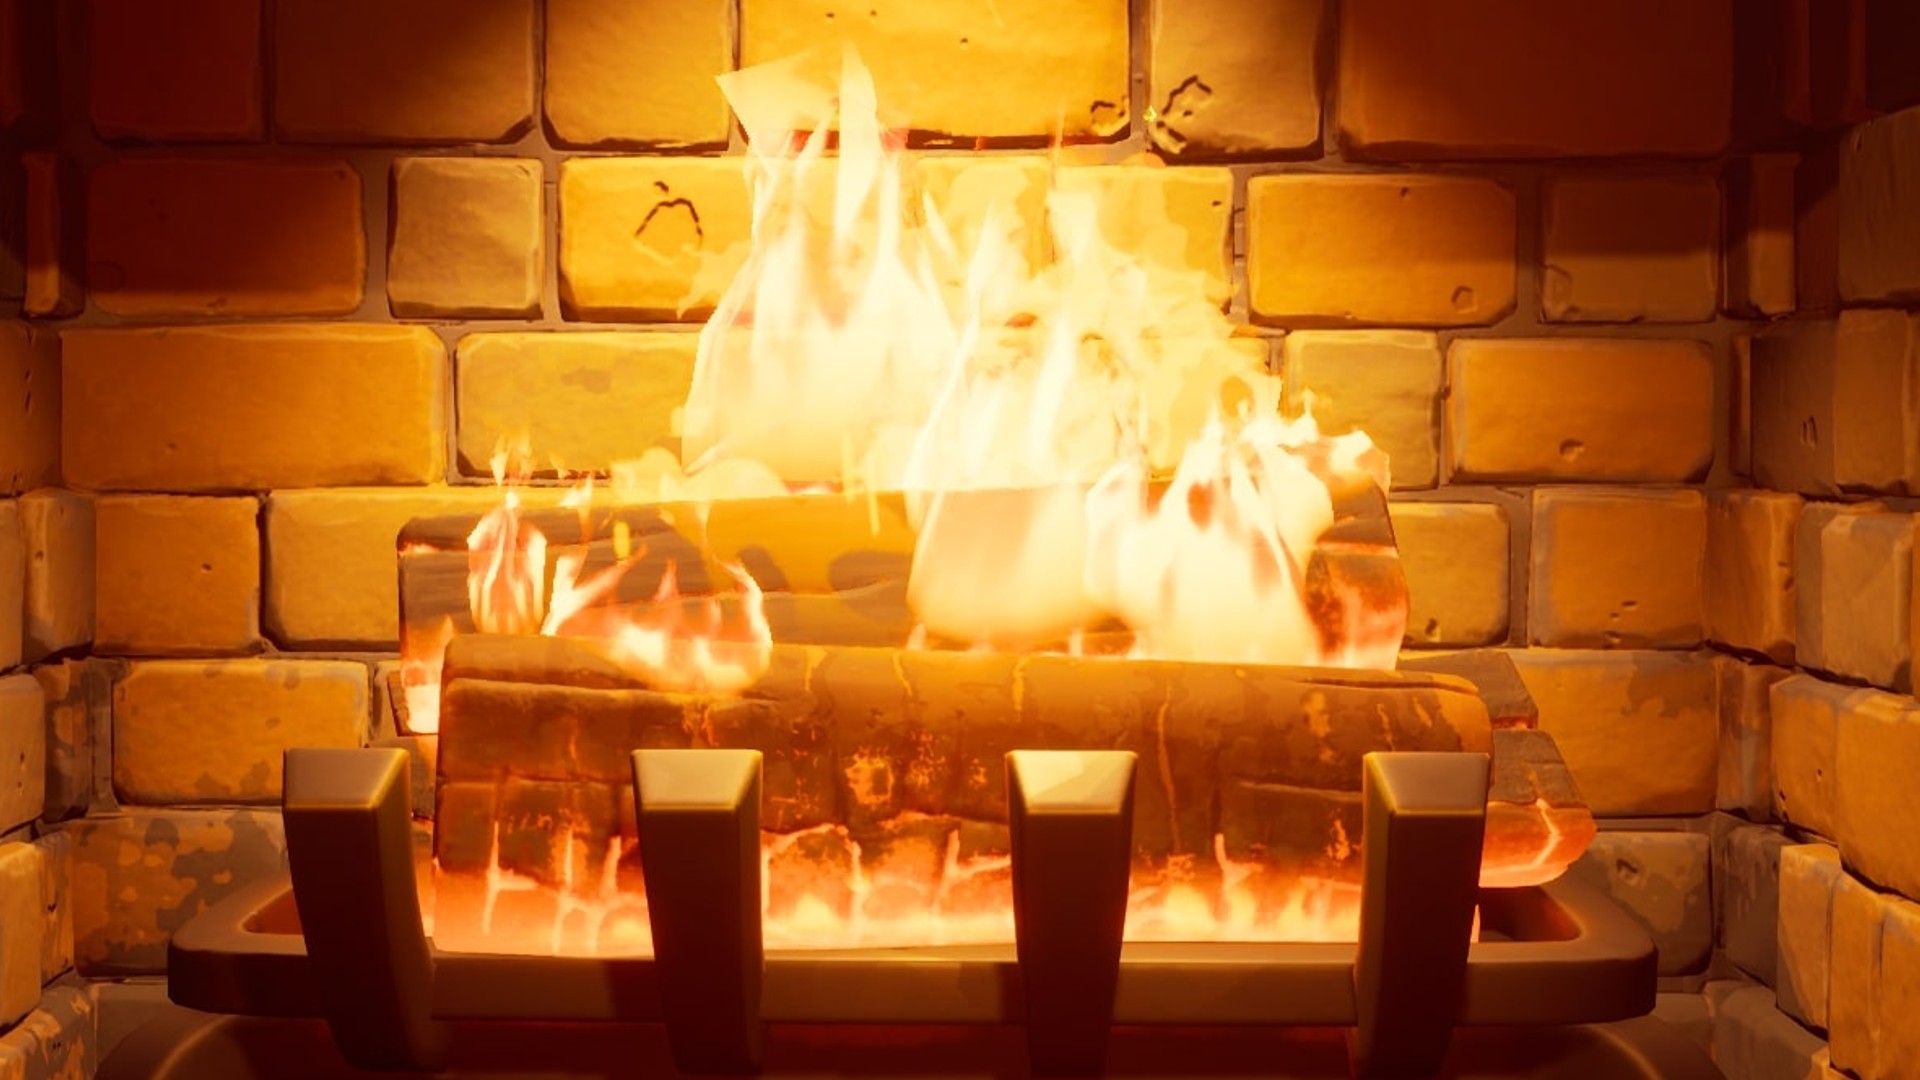  How to warm yourself up at the Yule log in Cozy Lodge in Fortnite 